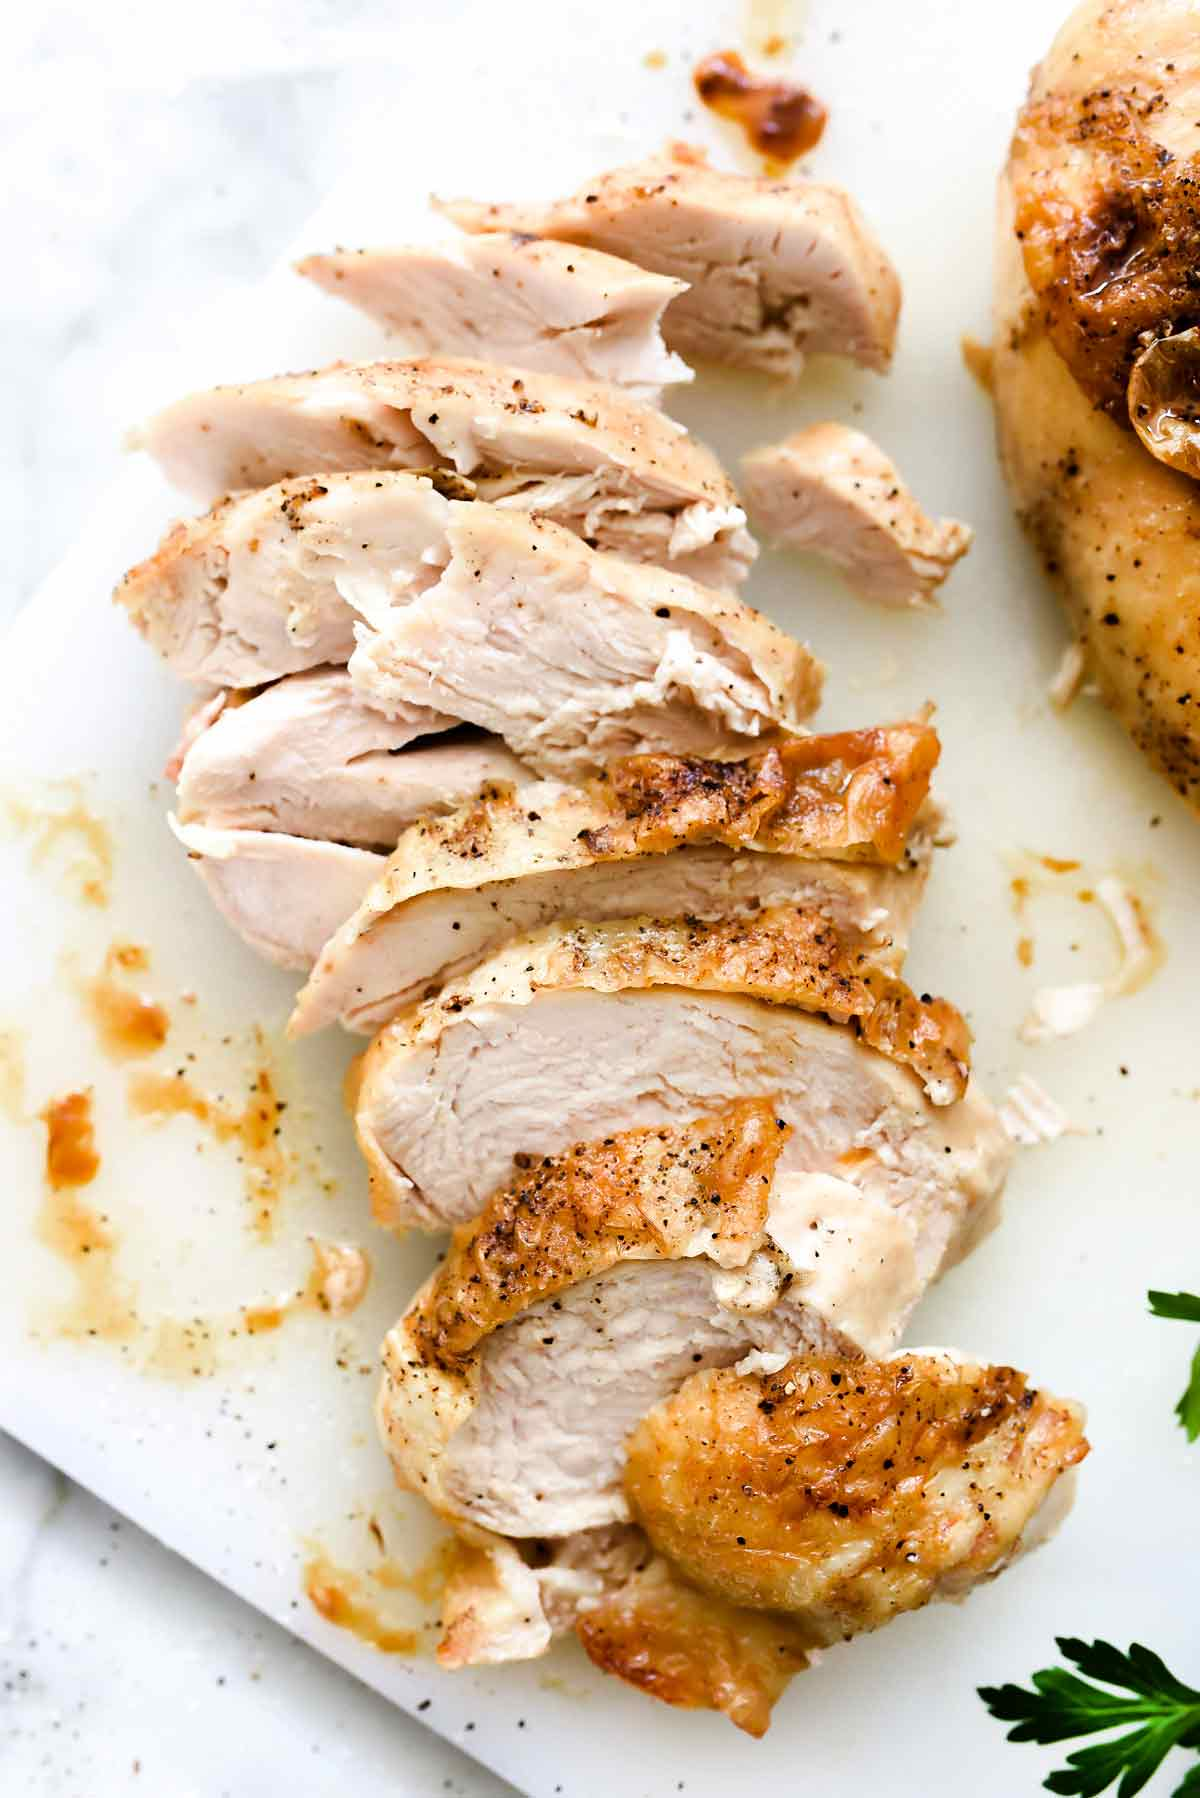 The Best Baked Chicken Breast | foodiecrush.com #chicken #breast #breast #healthy #recipes #easy